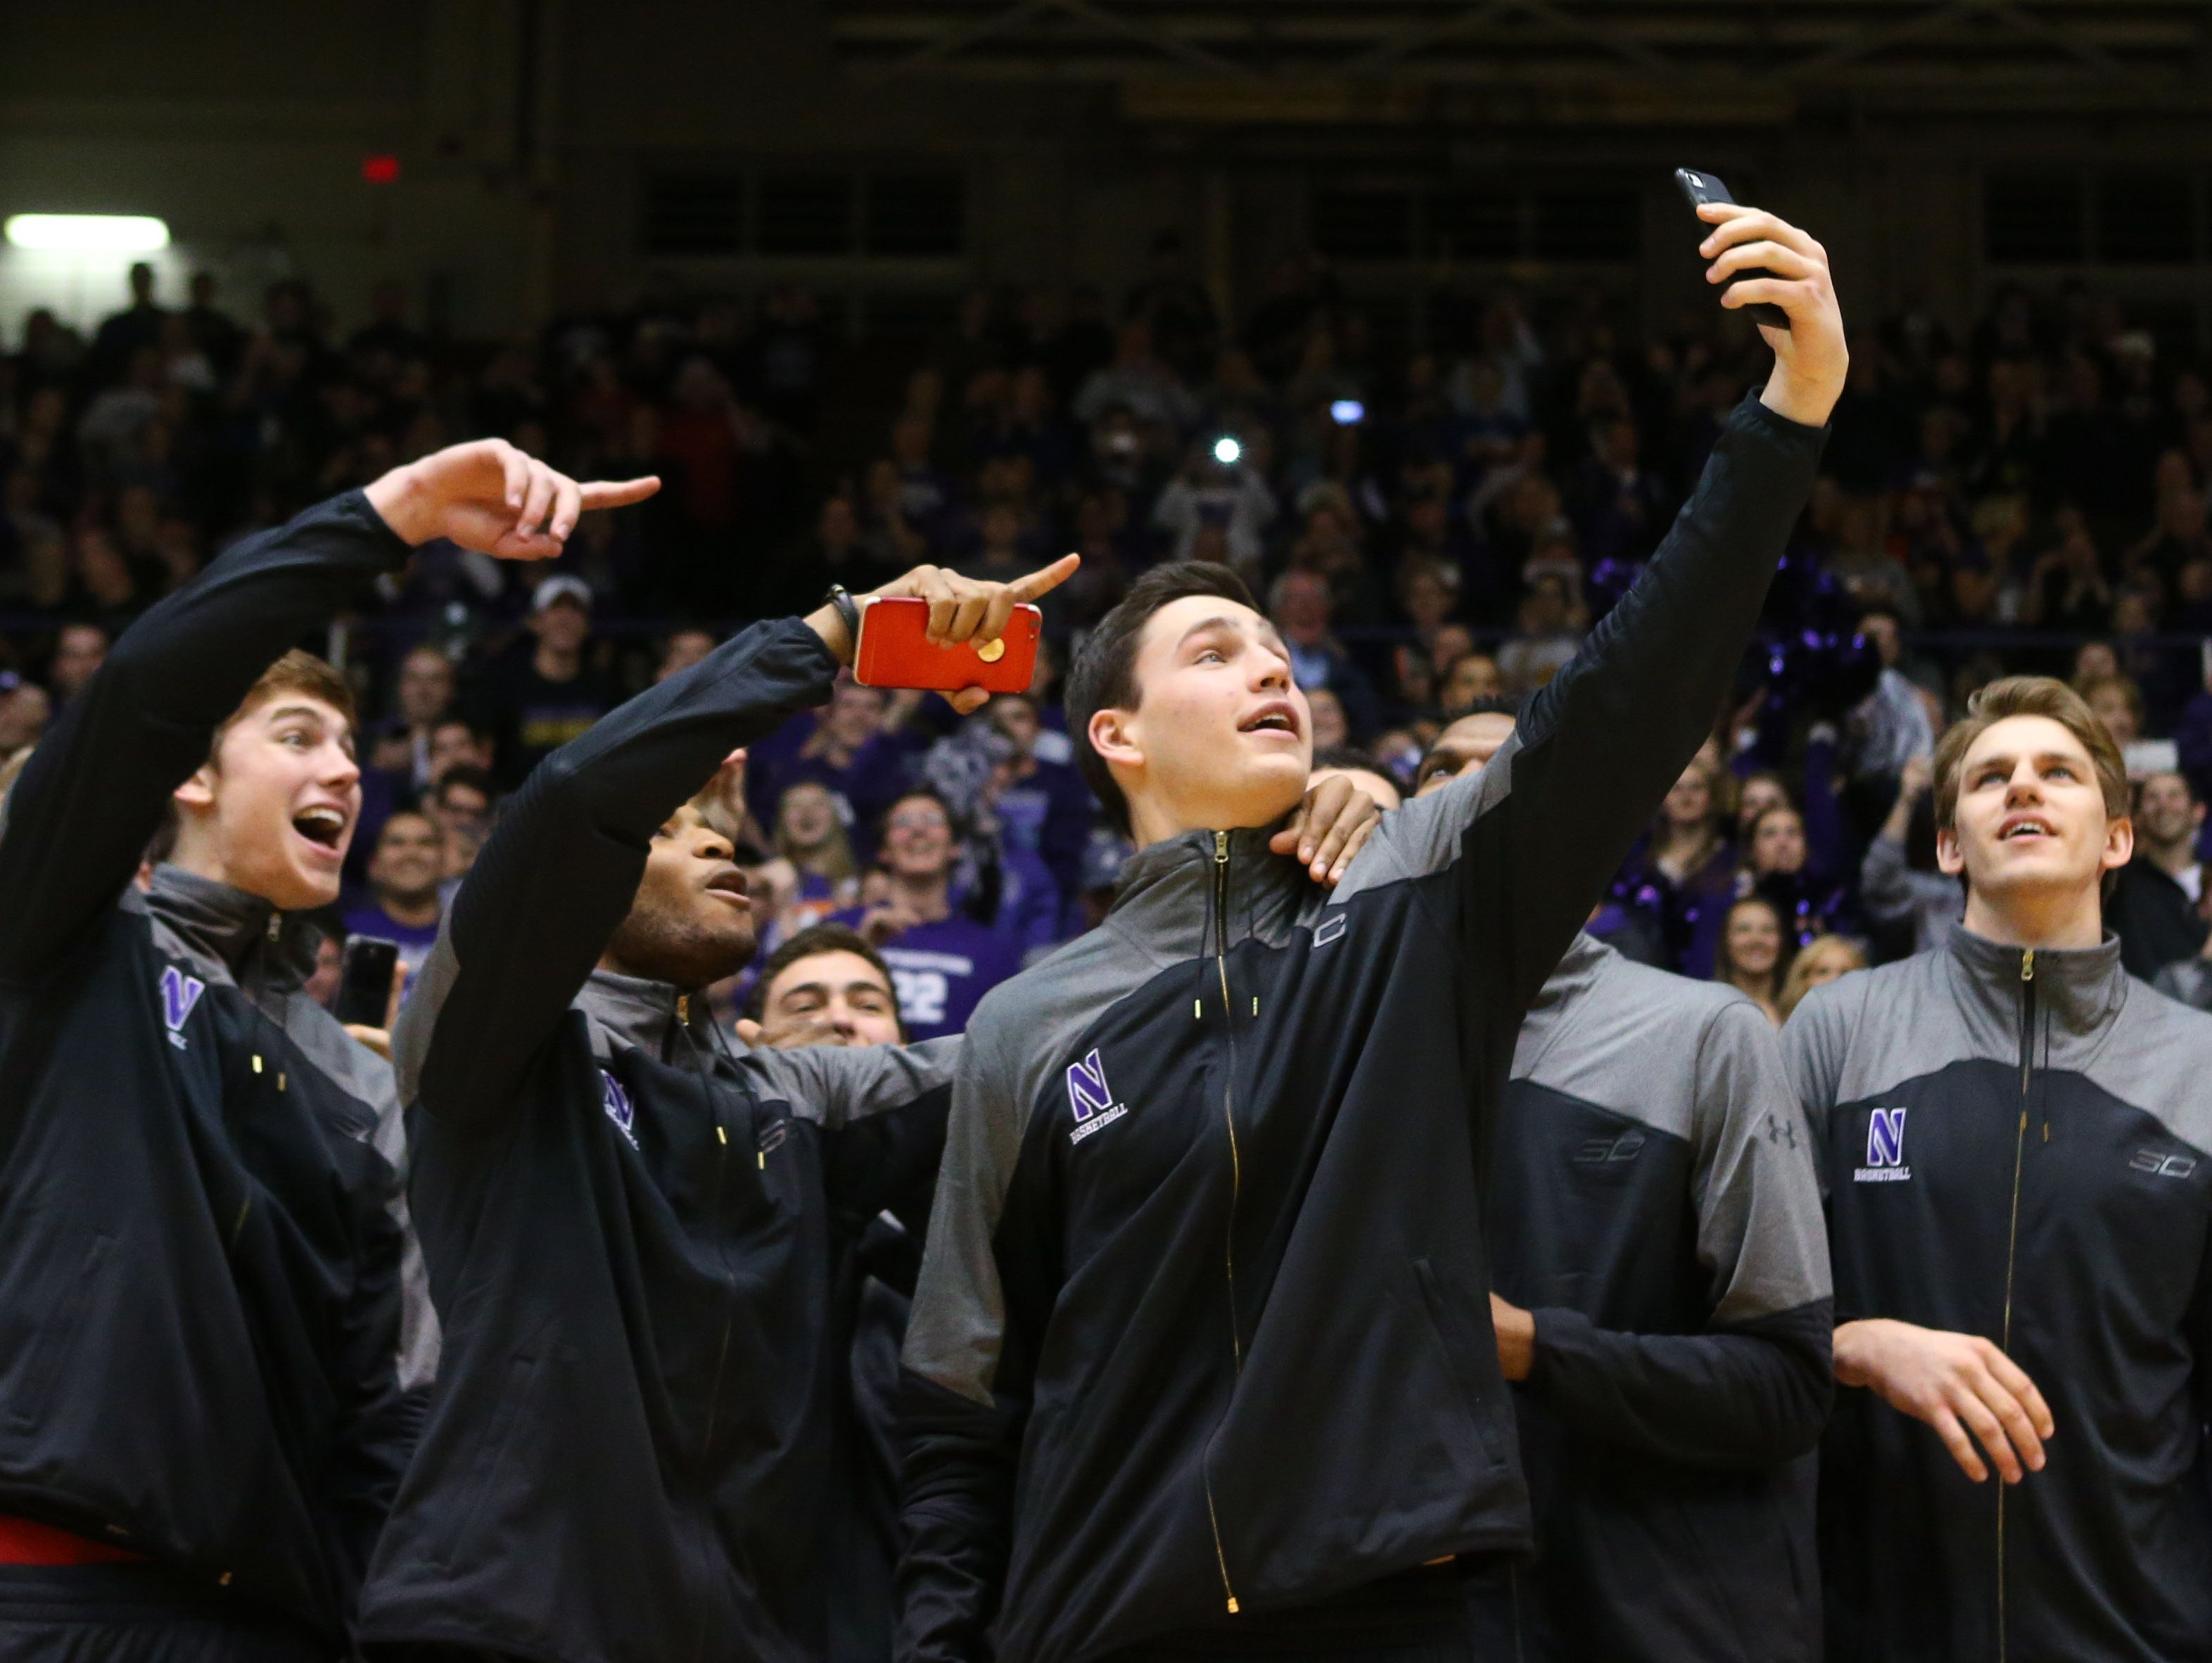 Charlie Hall, Northwestern soak up March Madness experience USA TODAY